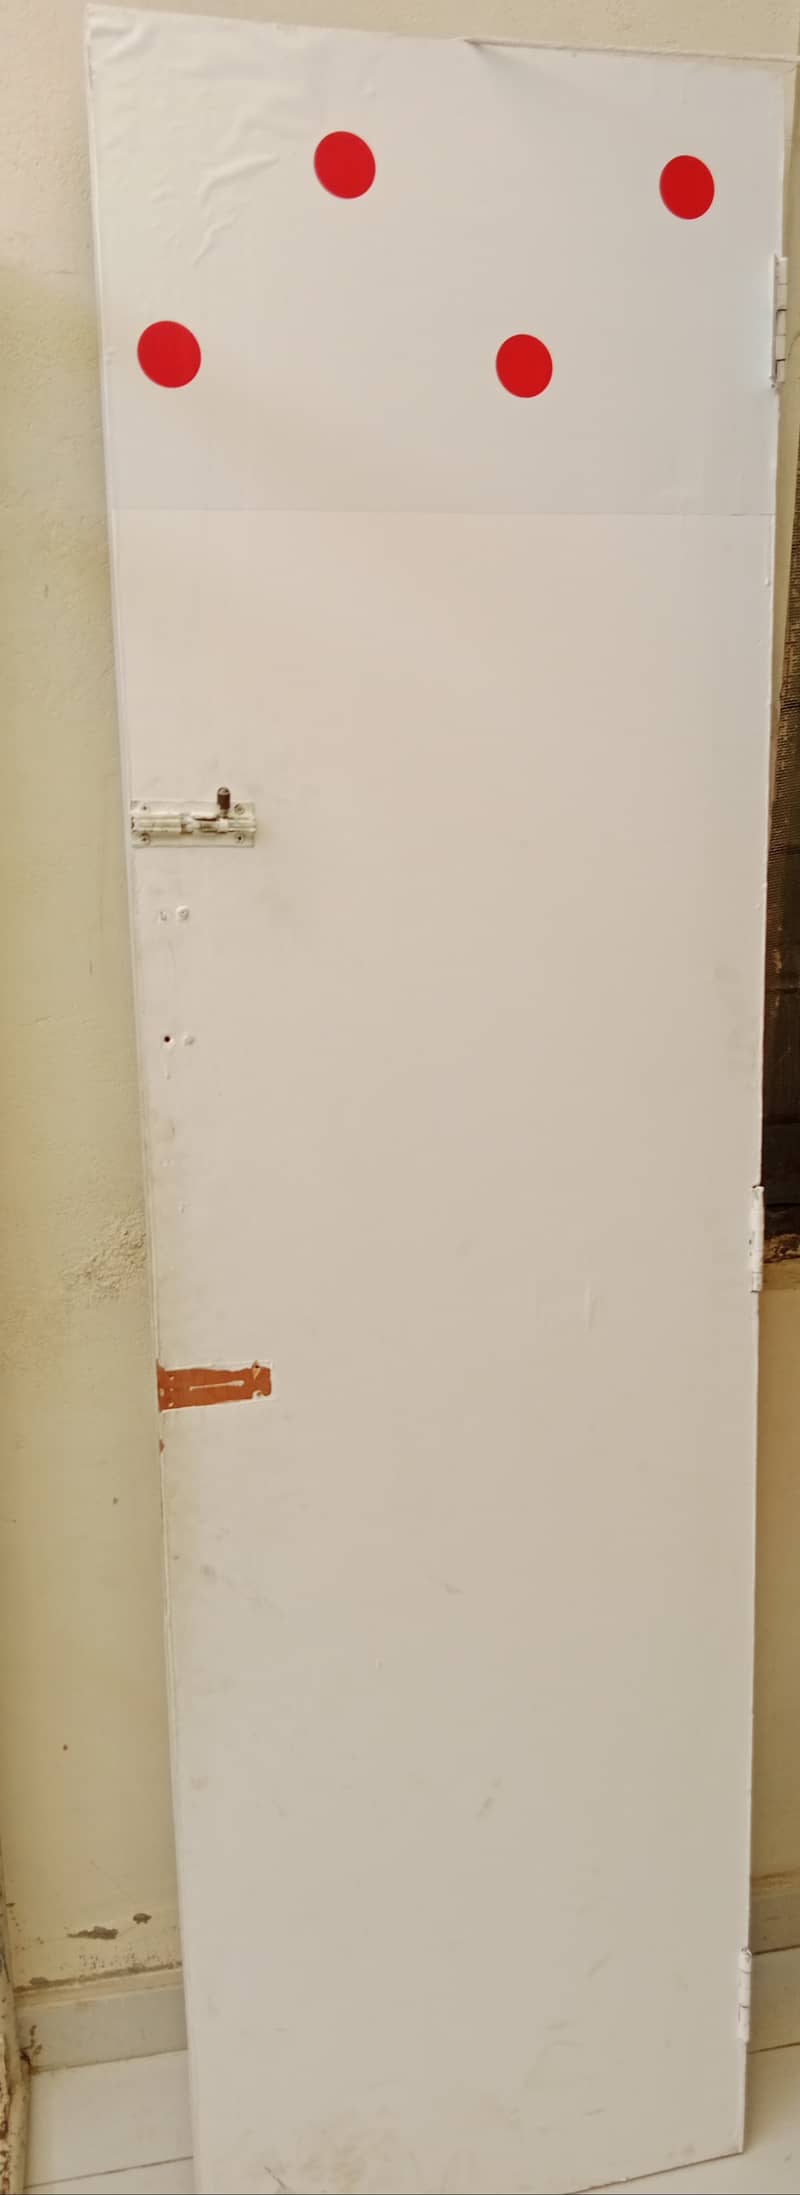 Door for sale neat and clean only WhatsUp 03060103003 13